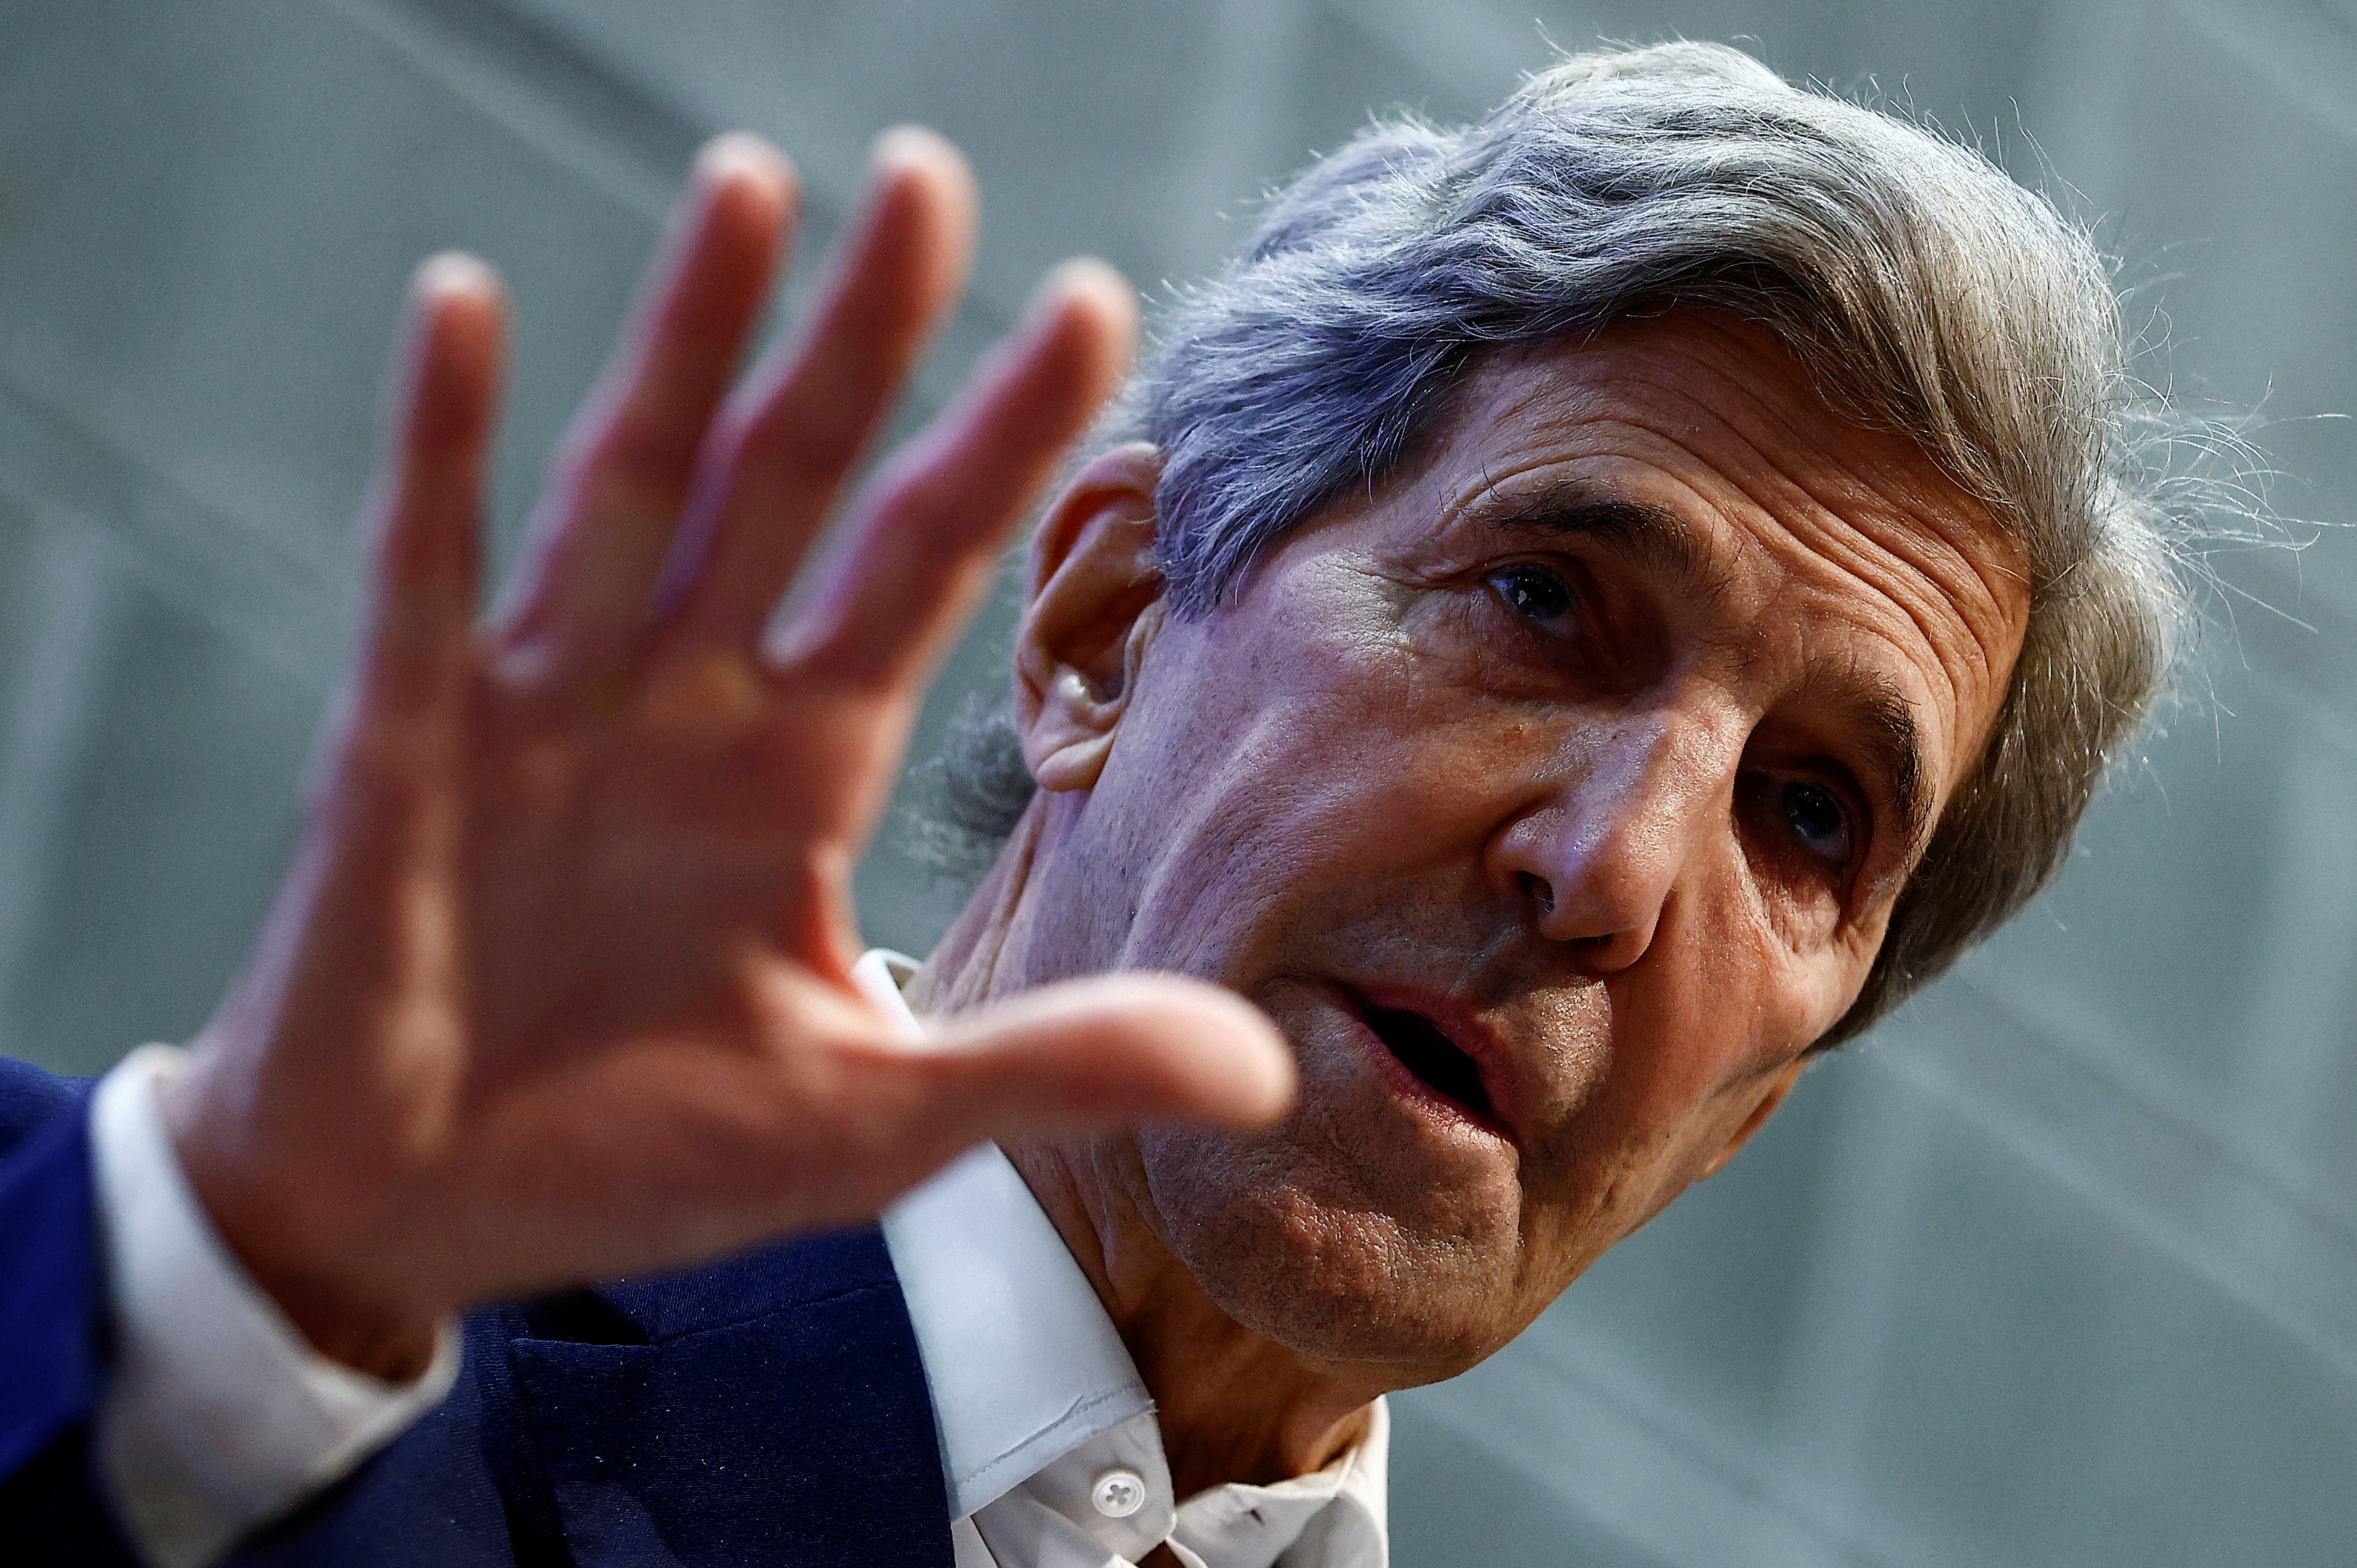 John Kerry, U.S. Special Presidential Envoy for Climate, holds a news conference during the pre-COP26 climate meeting in Milan, Italy, October 2, 2021. REUTERS/Guglielmo Mangiapane